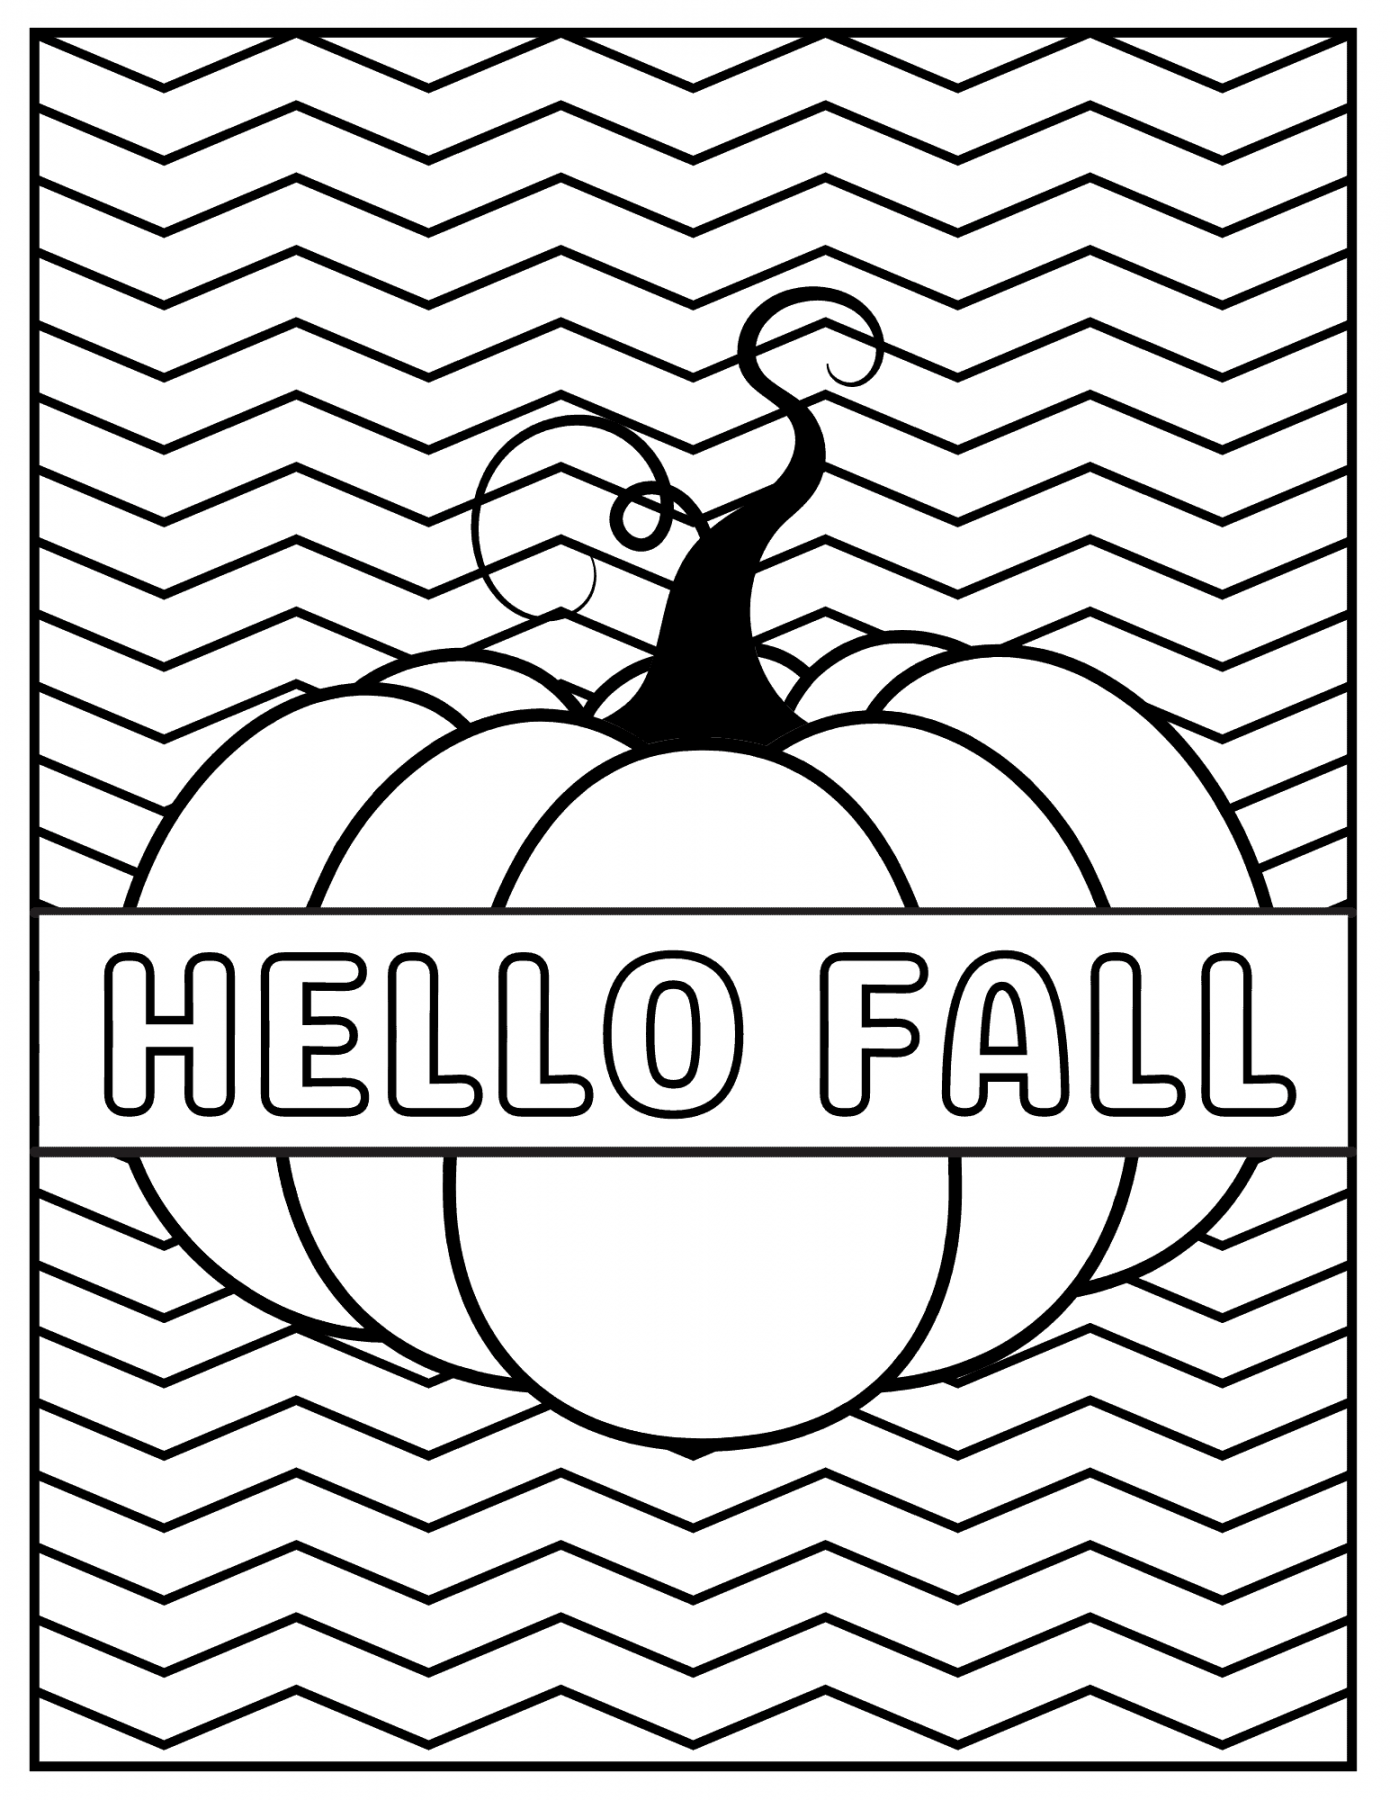 Fall Coloring Pages Free Printable - Printable -  Free Printable Fall Coloring Pages - Prudent Penny Pincher